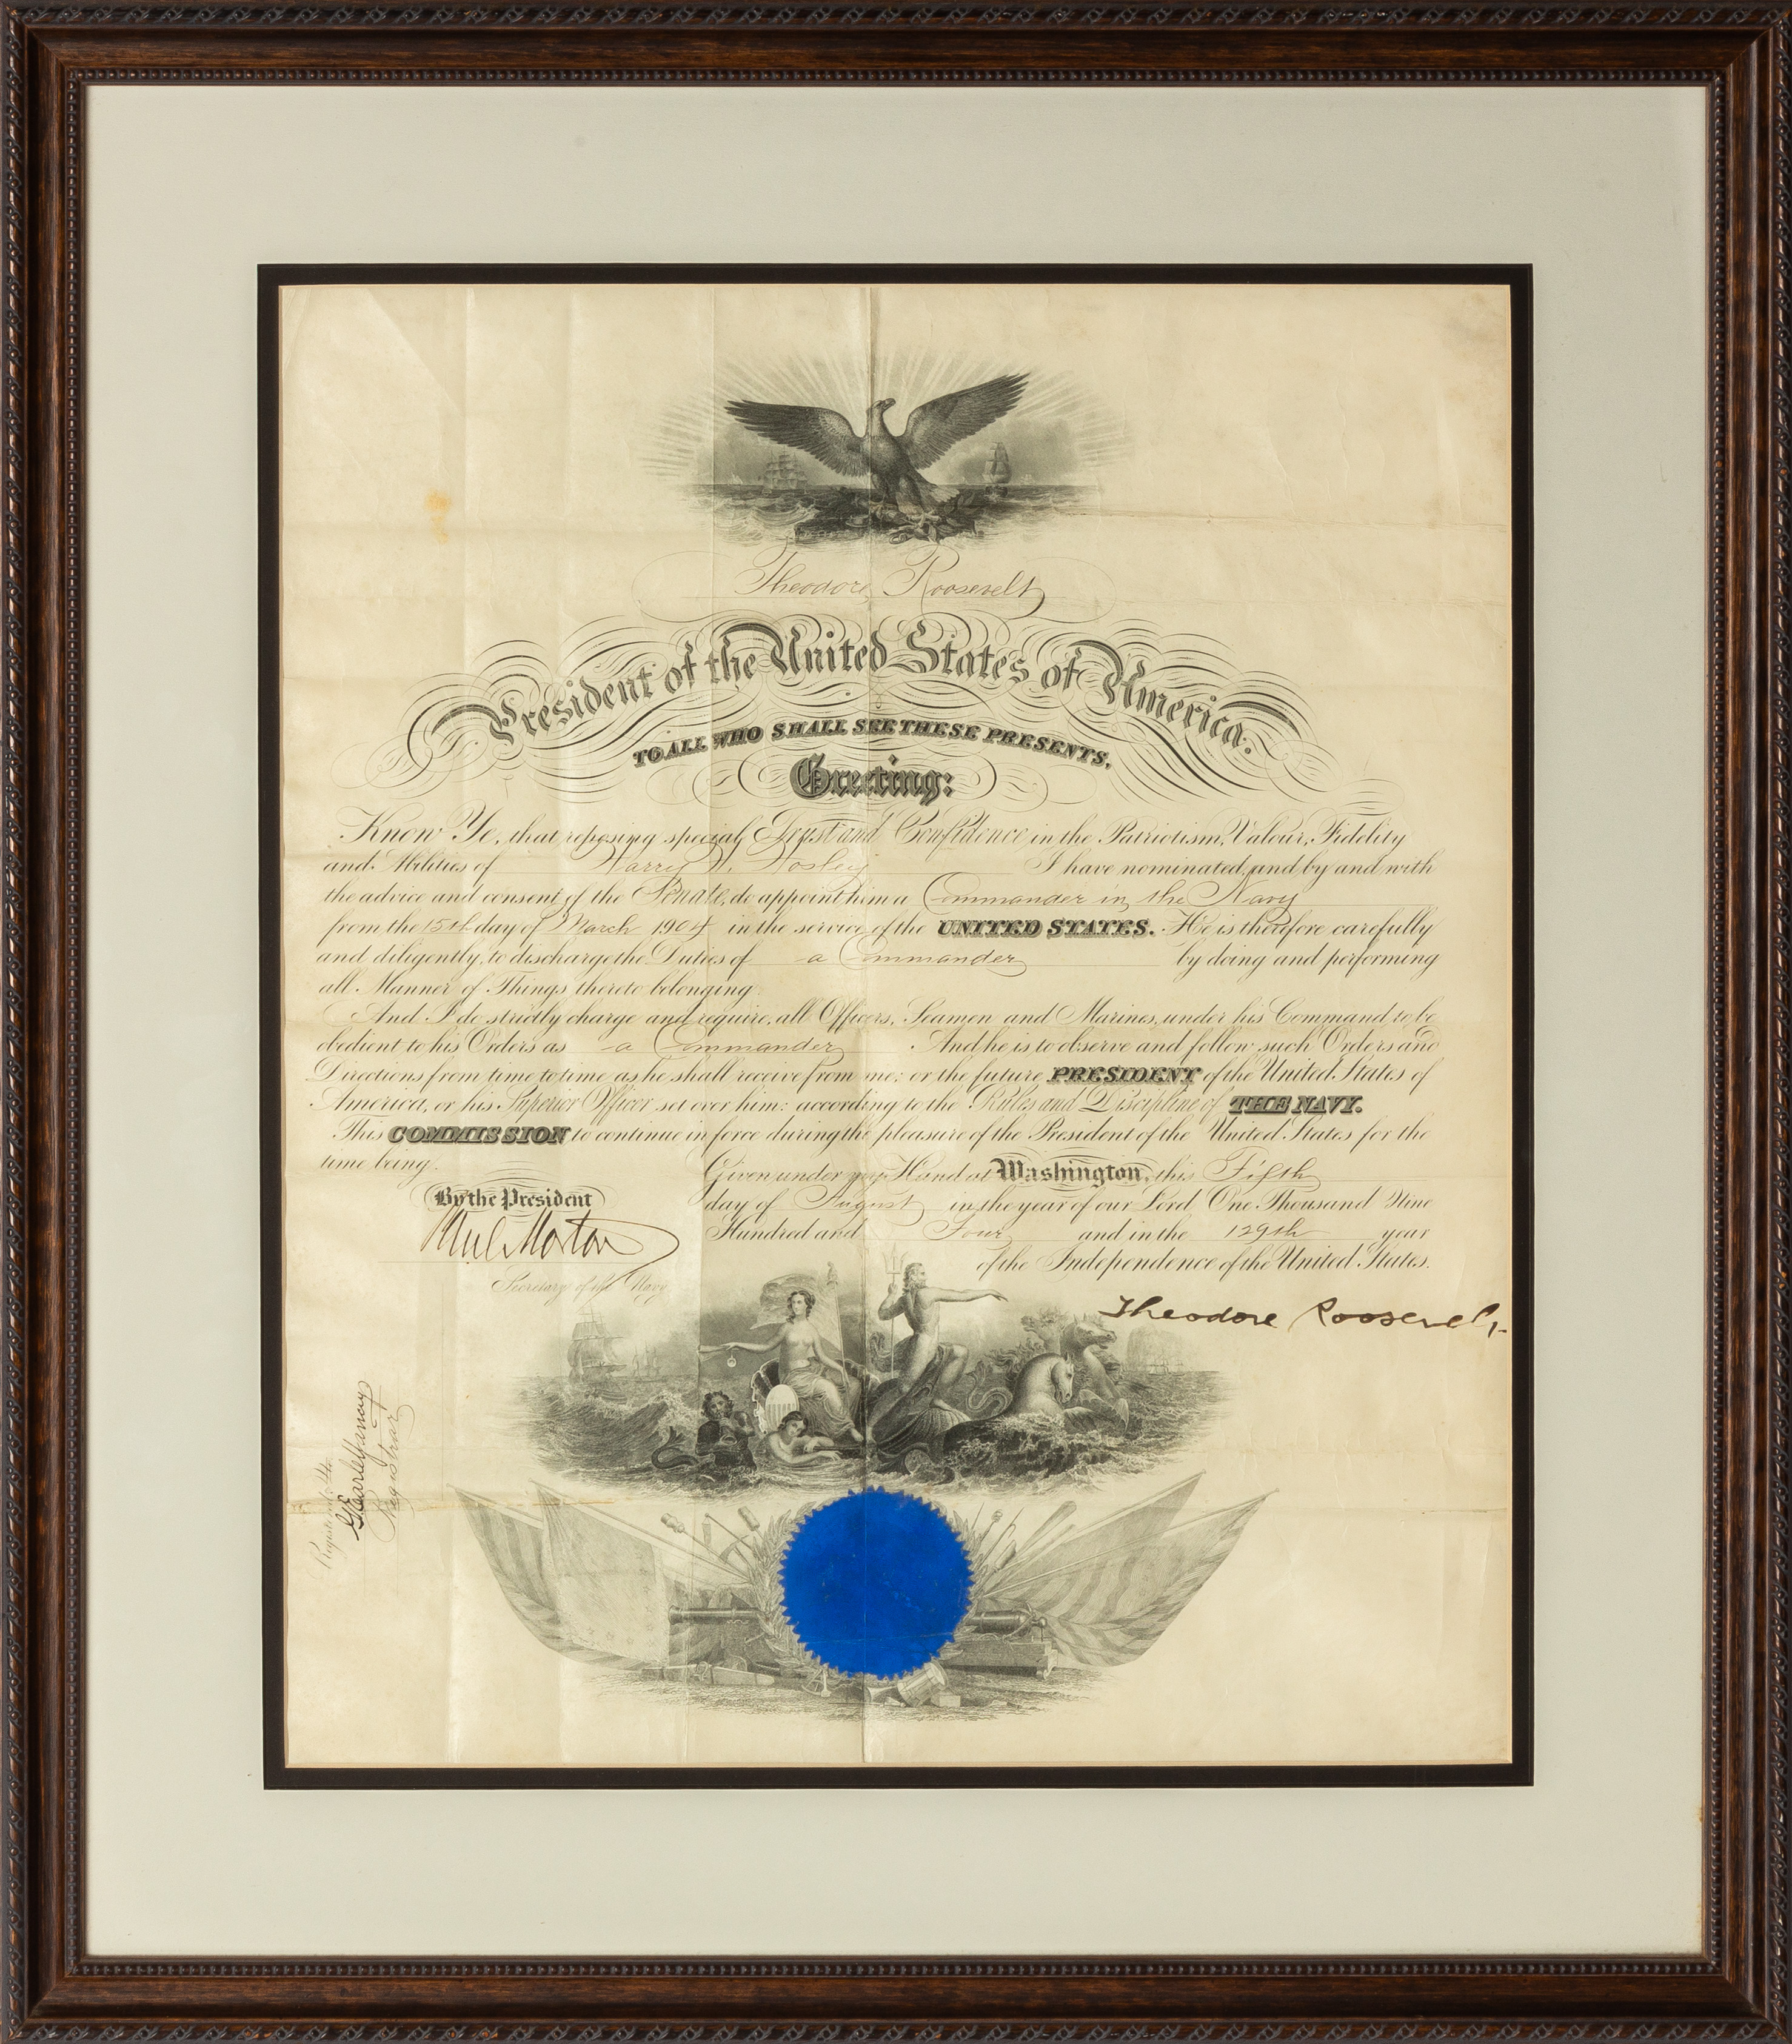 SIGNED THEODORE ROOSEVELT, NAVAL